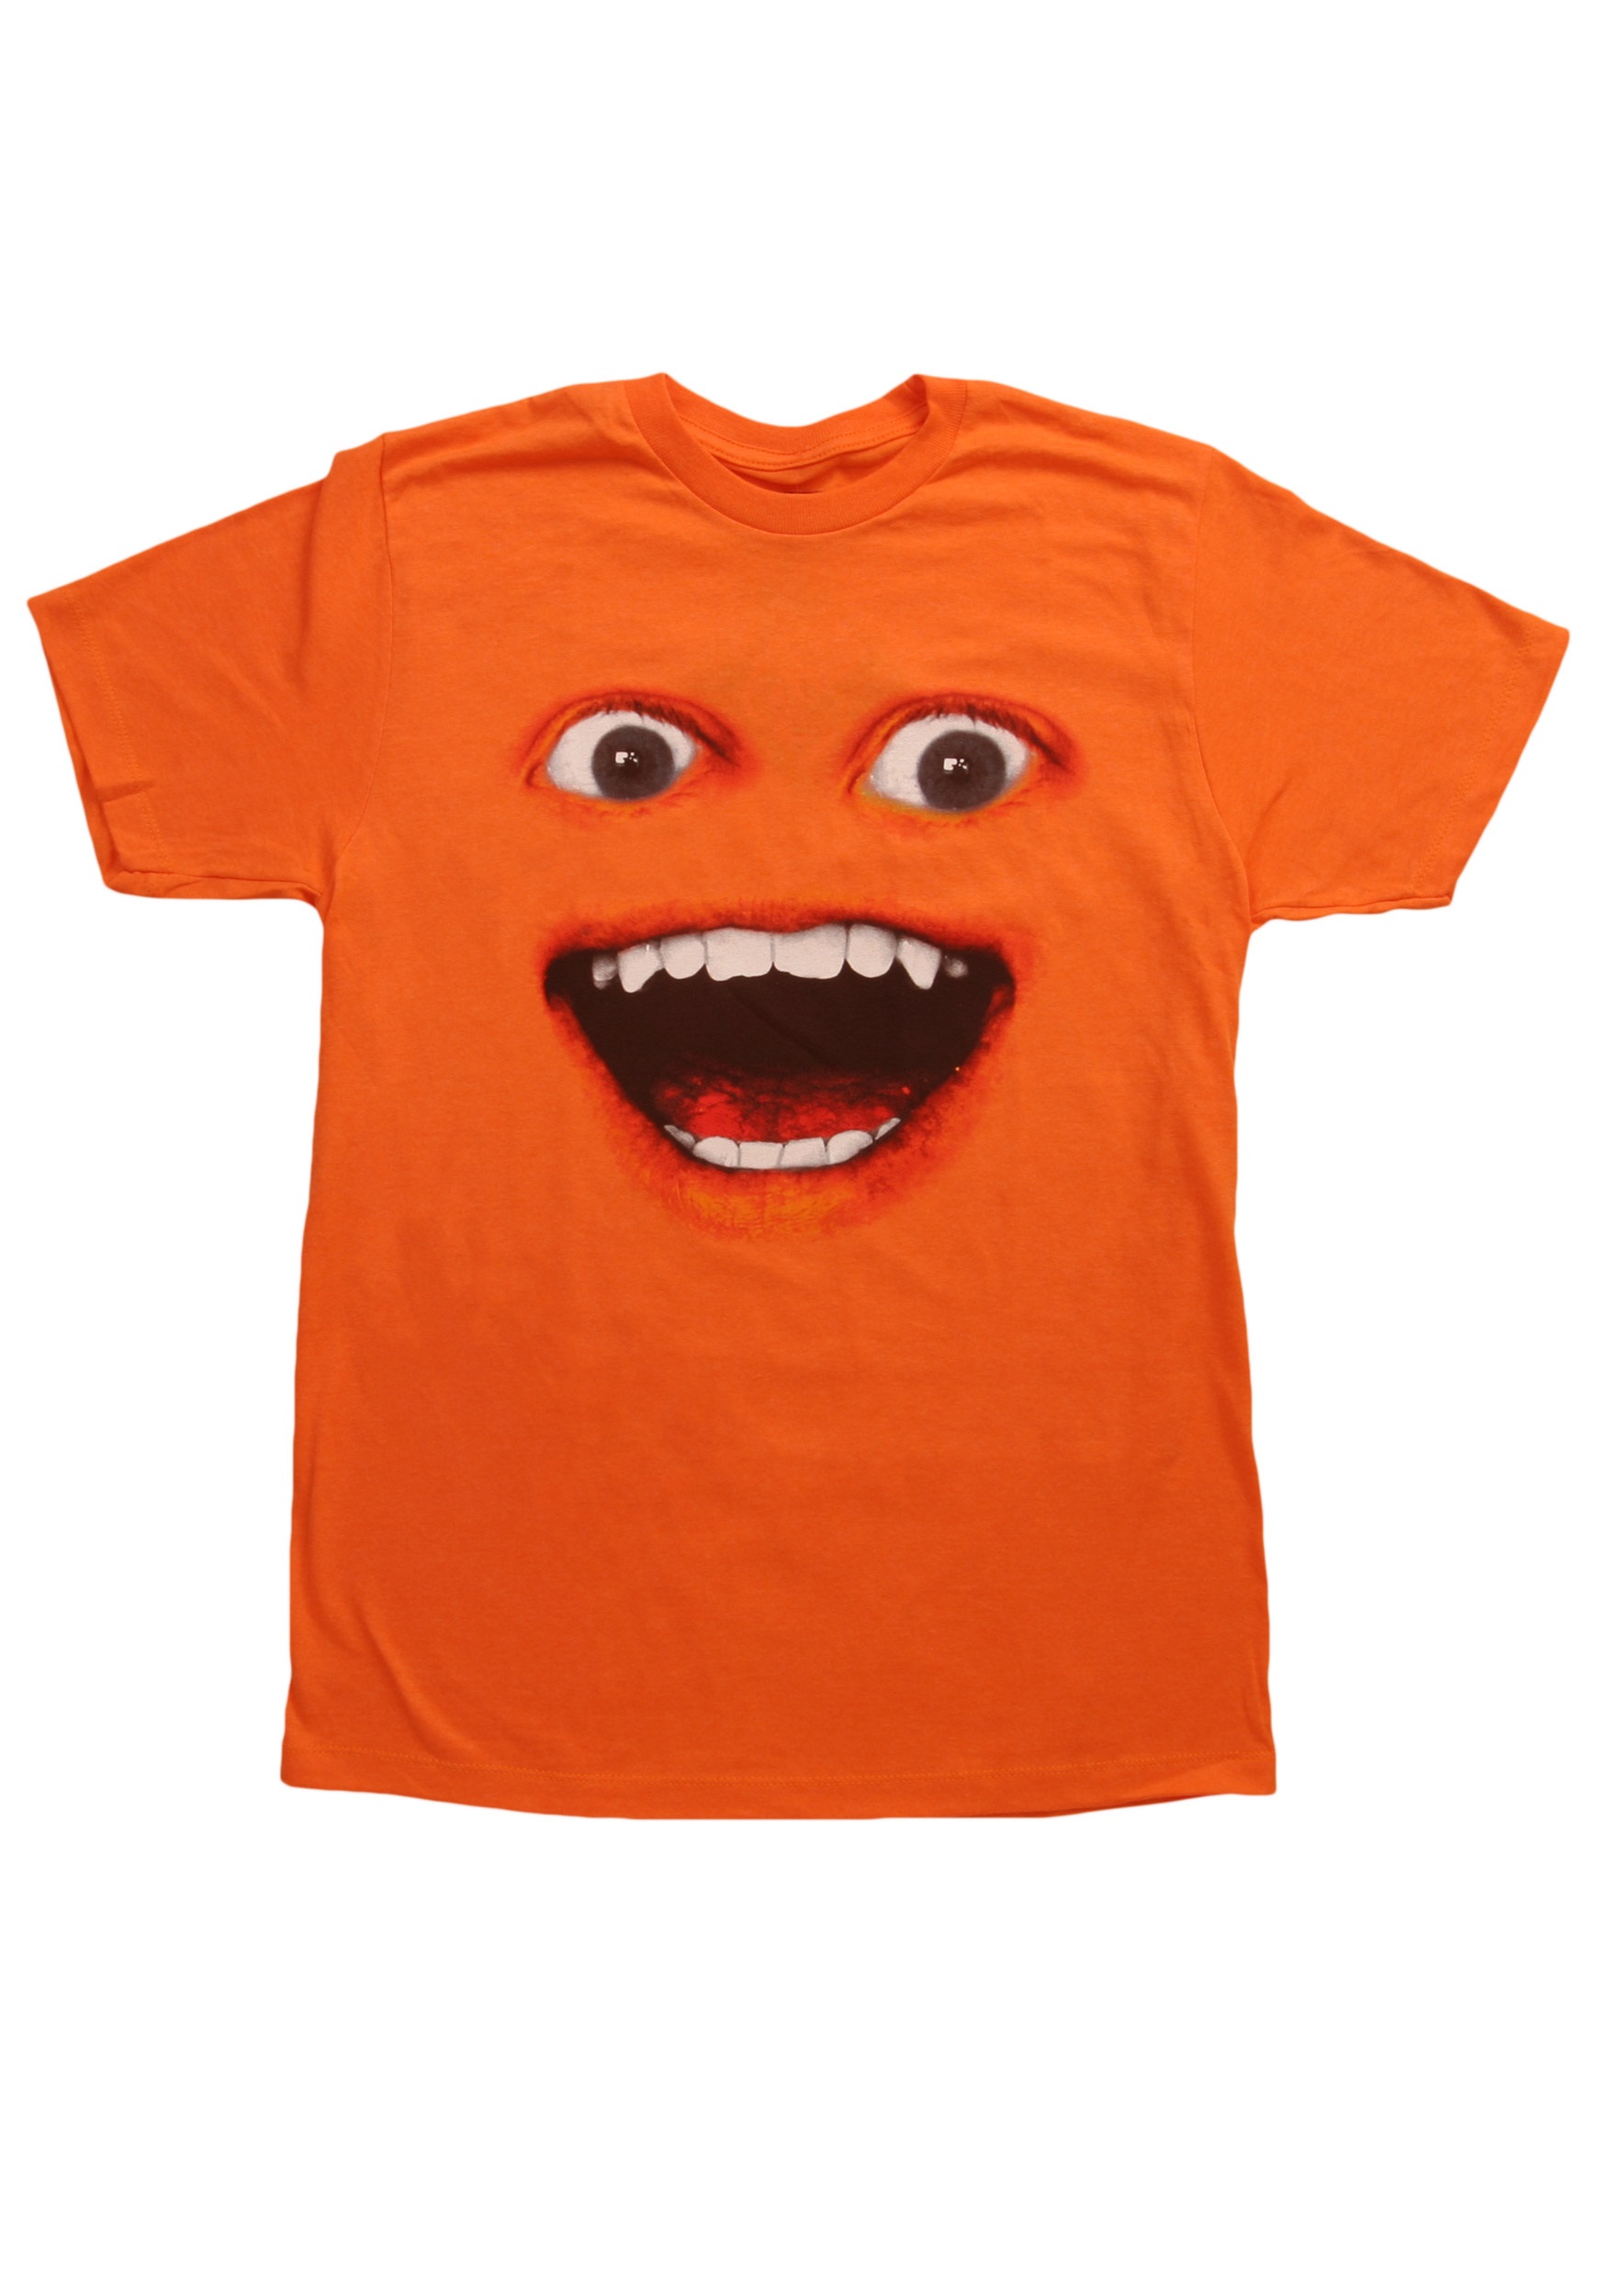 Annoying Orange Poncho Costume Halloween One Size Fits Most 4+